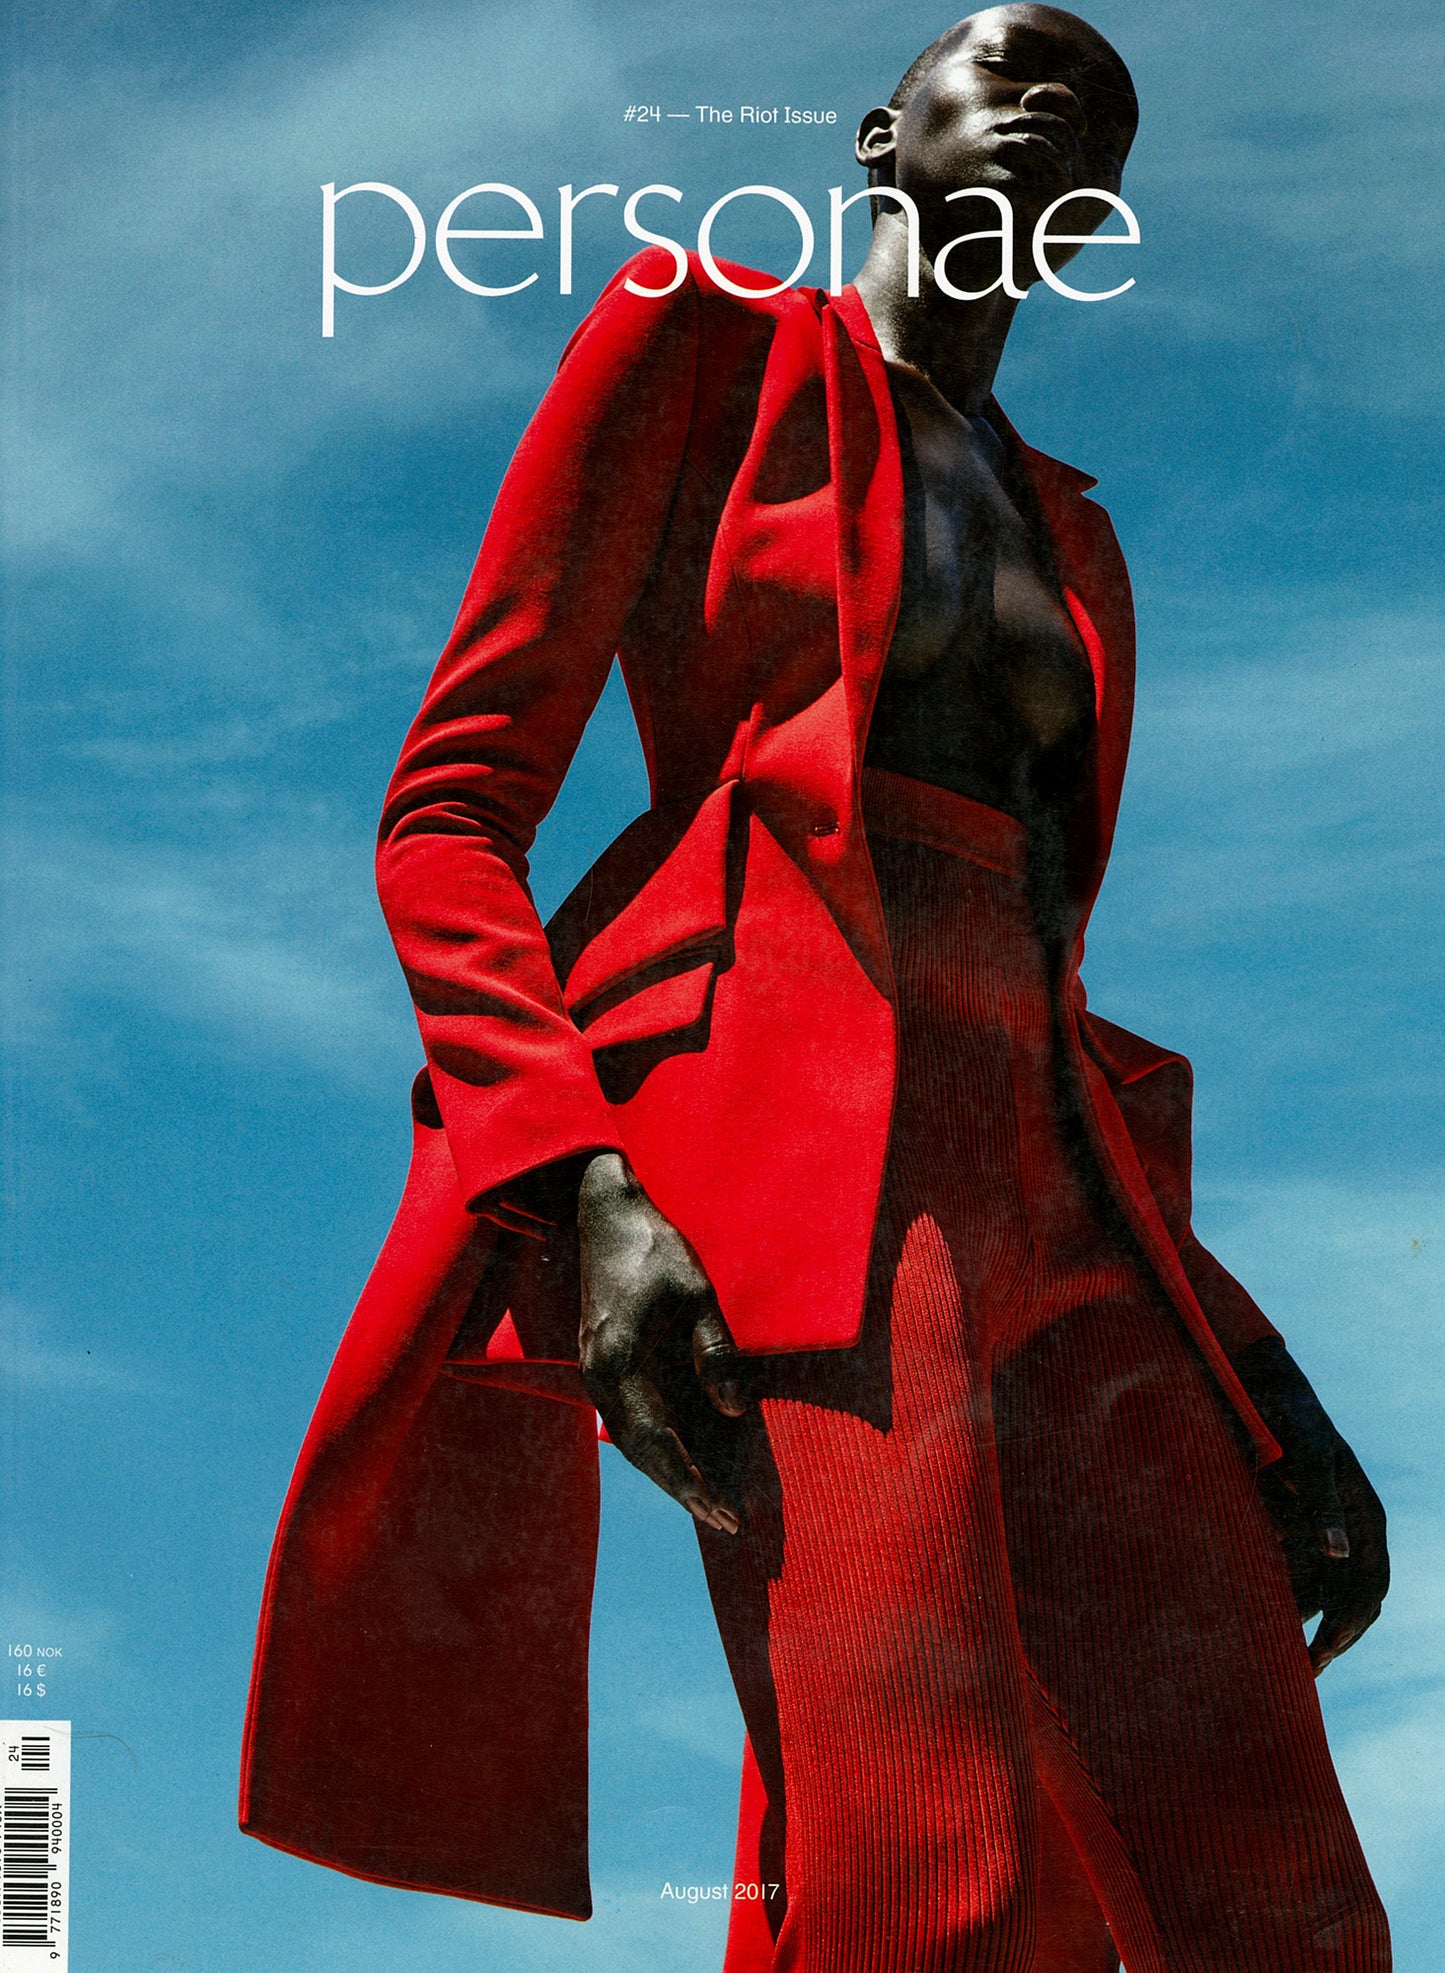 Personae 24 Cover3- Riot Issue